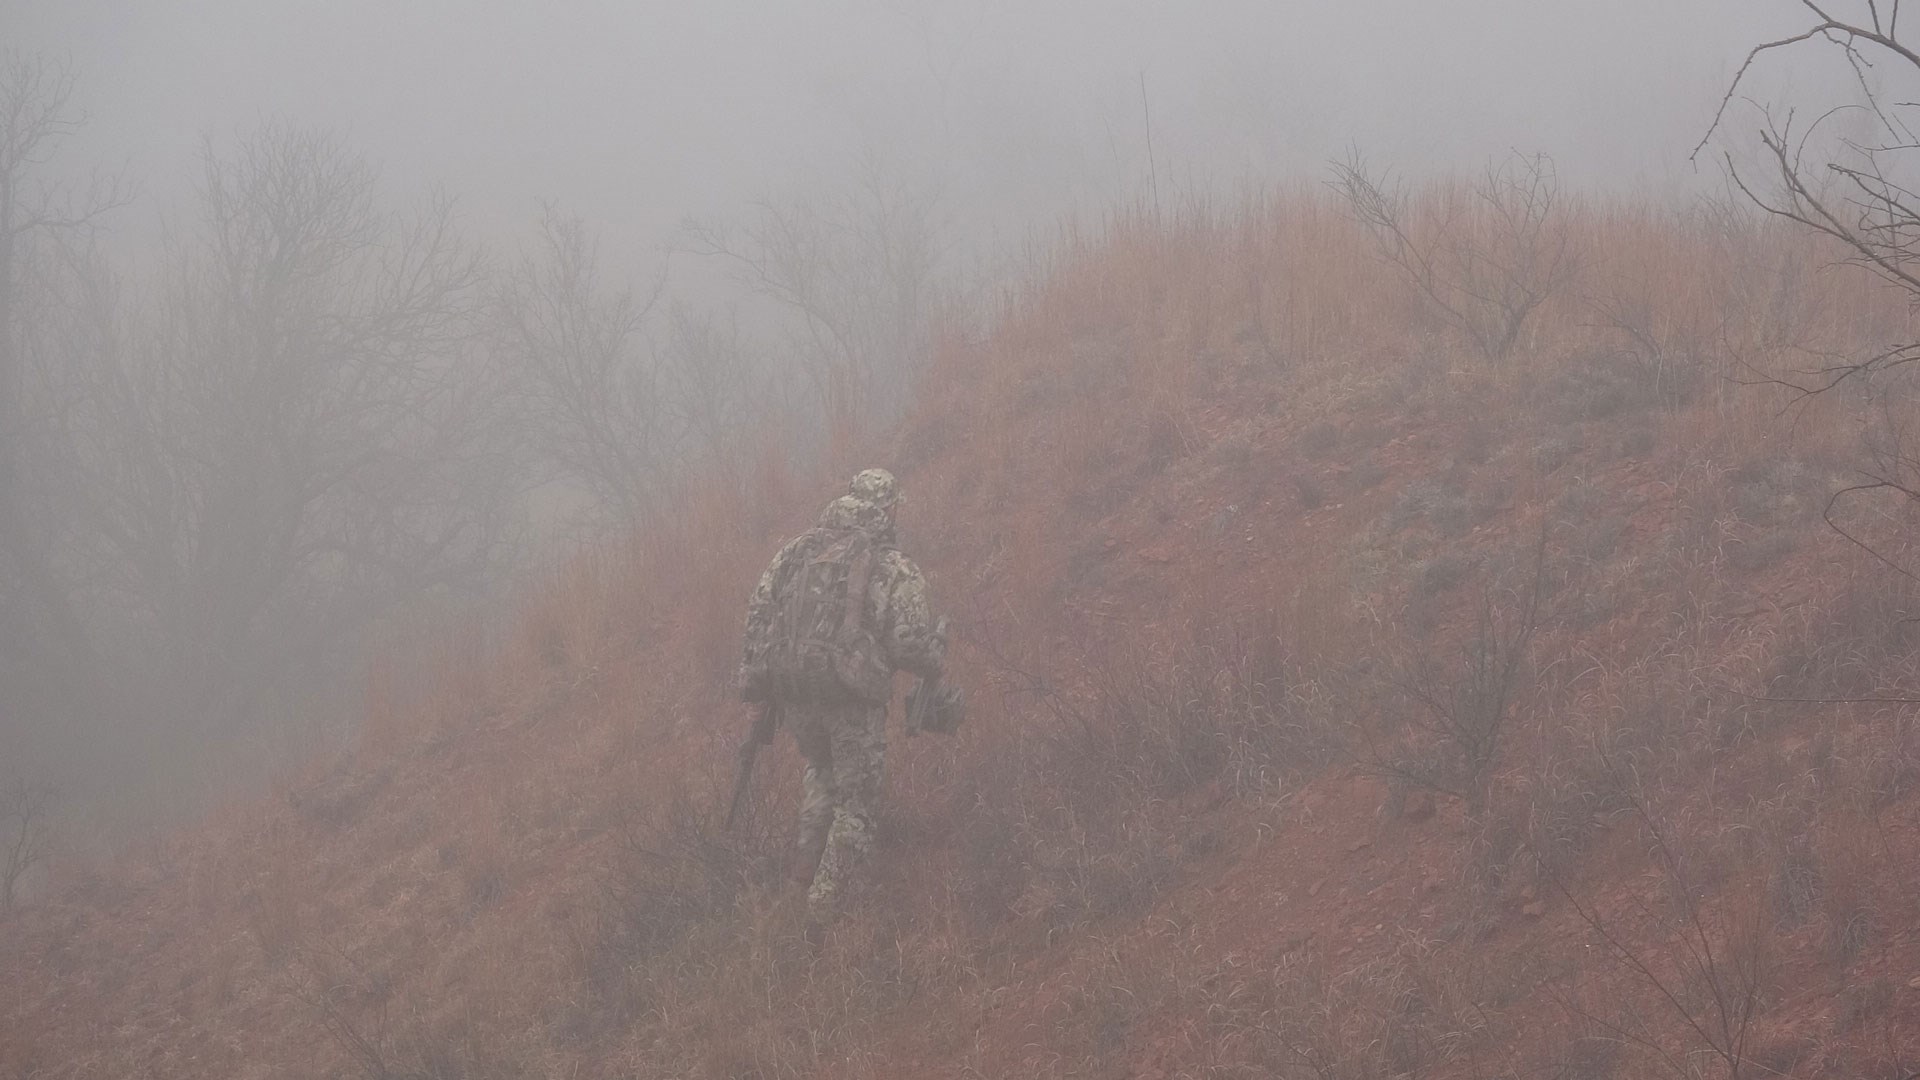 Author walks away from camera into the mist